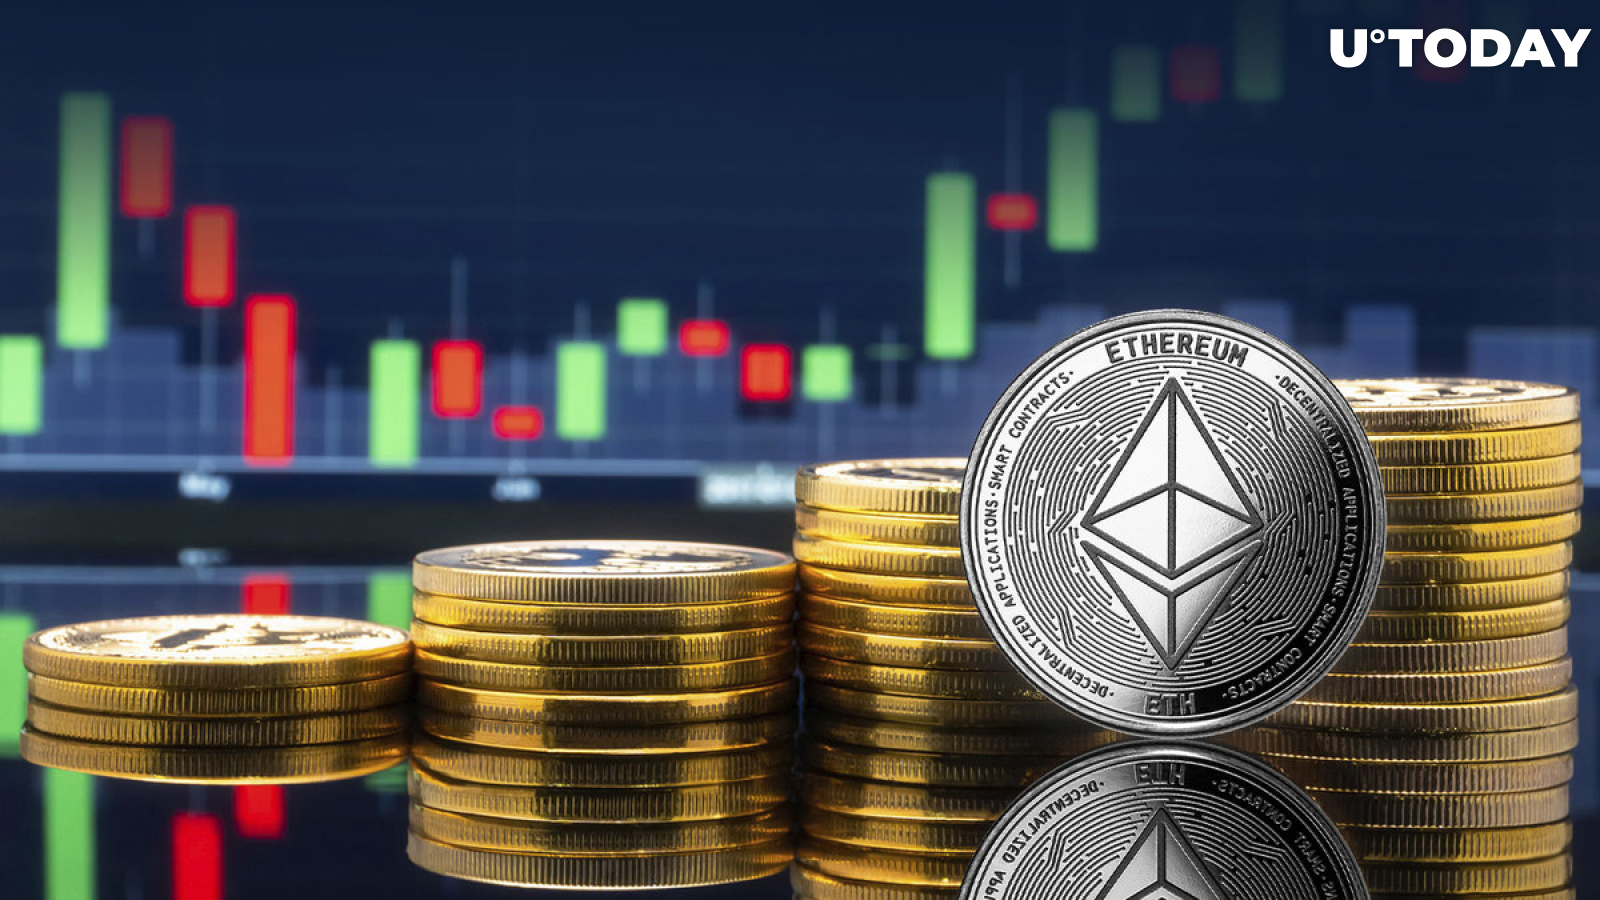 Ethereum (ETH): From Death to Golden Cross, Chart Shows Possibilities